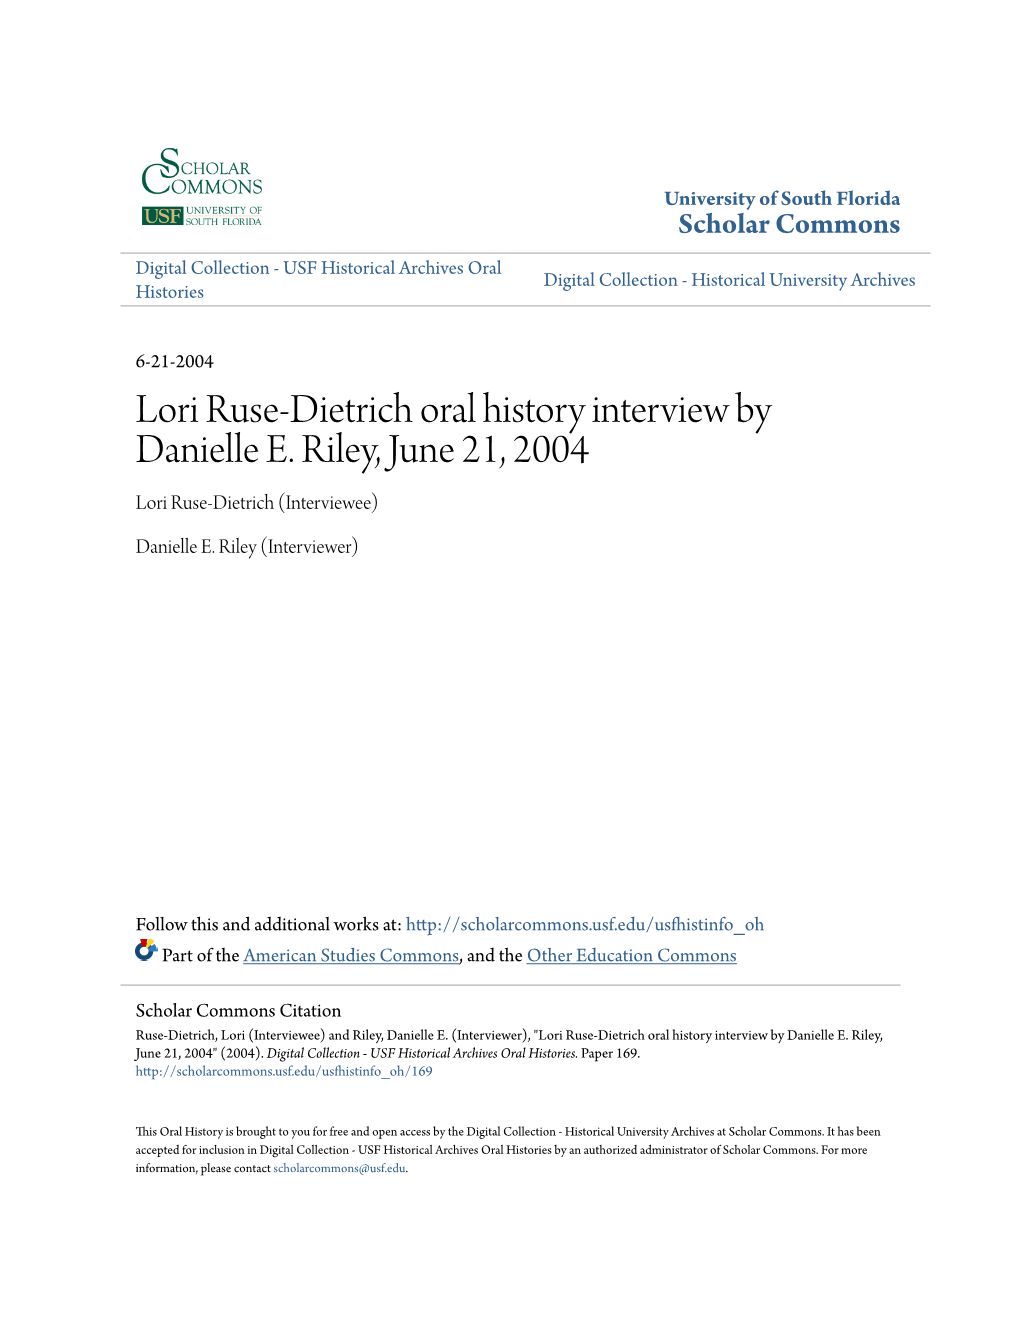 Lori Ruse-Dietrich Oral History Interview by Danielle E. Riley, June 21, 2004 Lori Ruse-Dietrich (Interviewee)